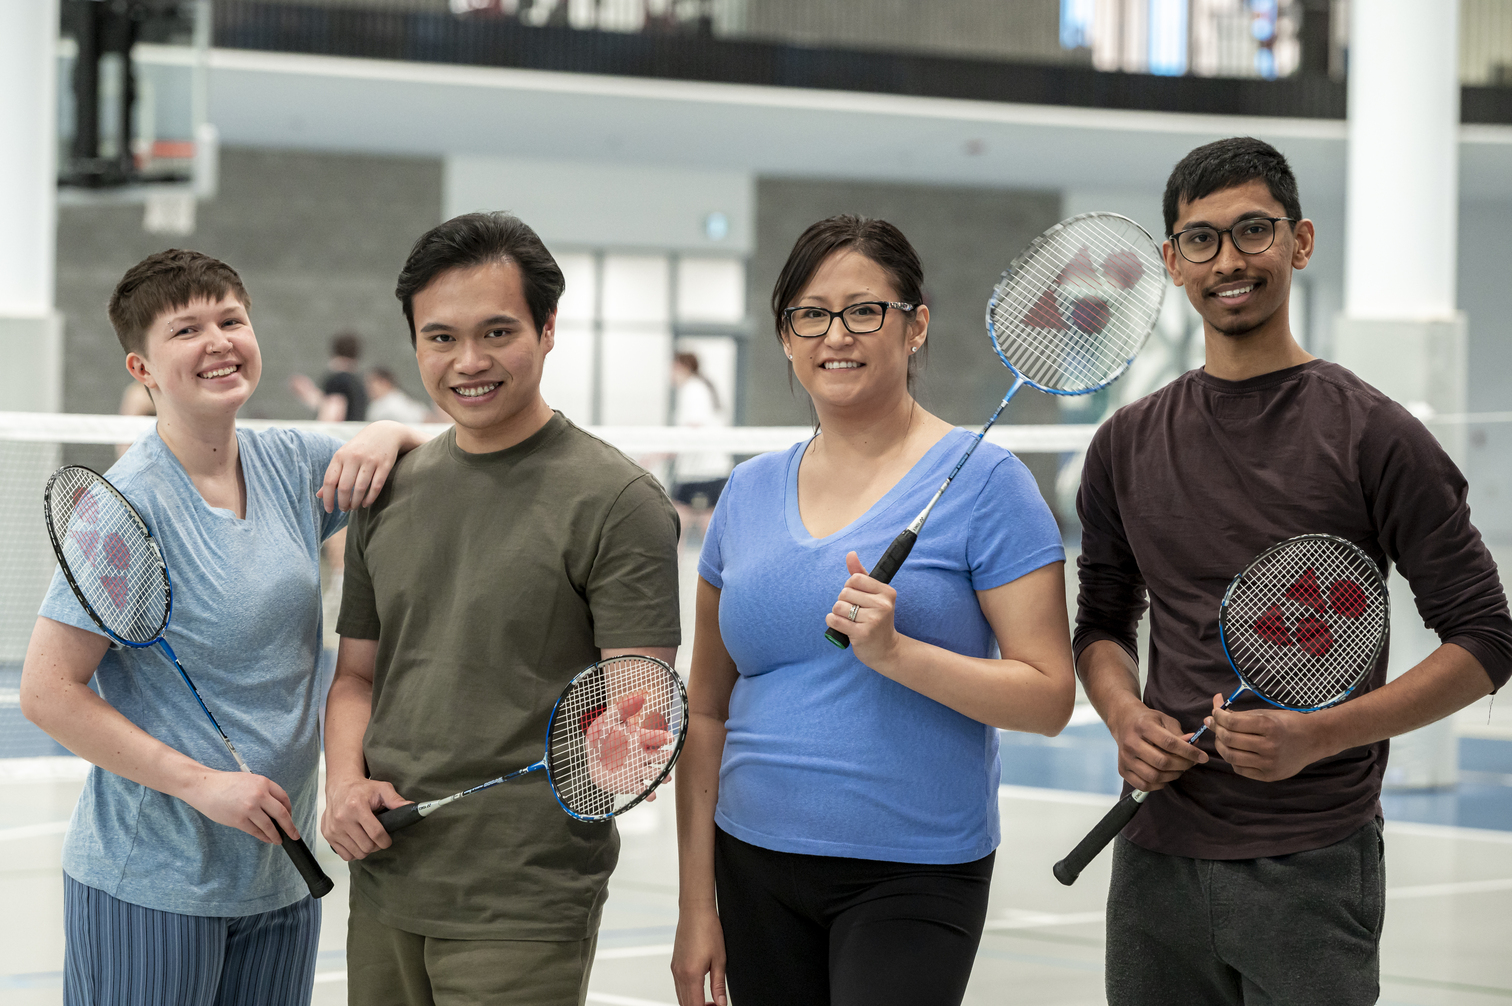 Four people holding sports racquets